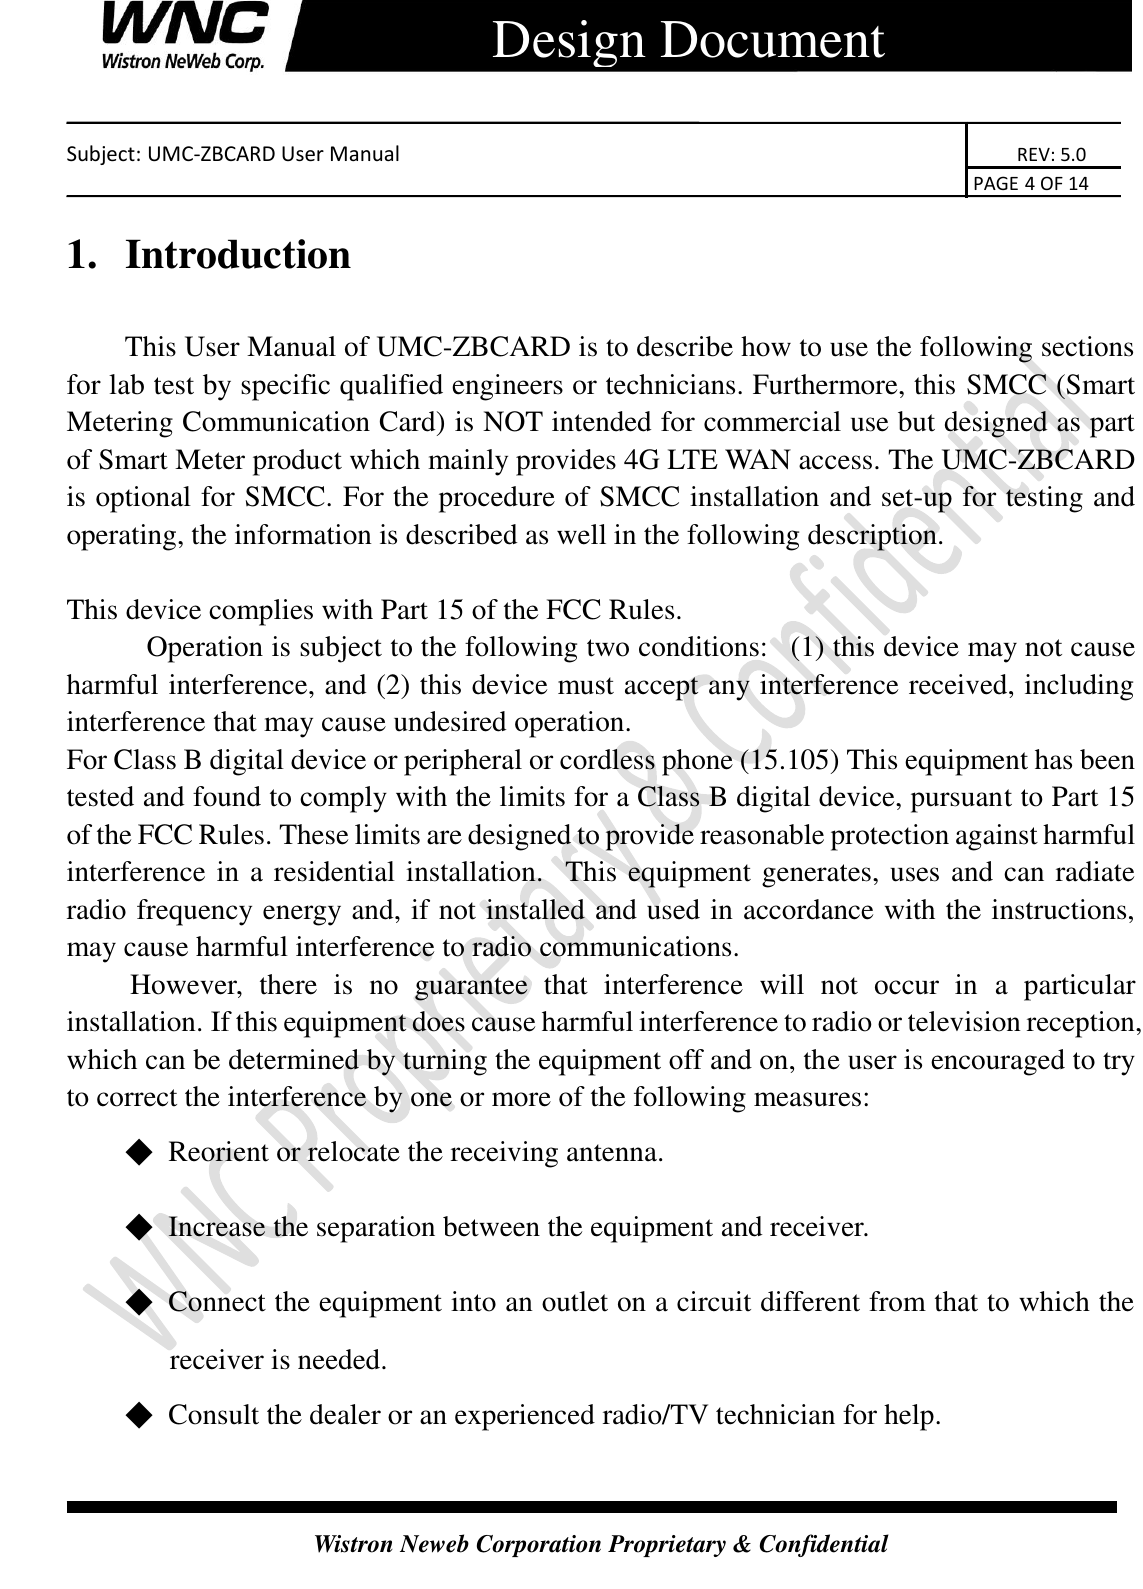    Subject: UMC-ZBCARD User Manual                                                                      REV: 5.0                                                                                        PAGE 4 OF 14  Wistron Neweb Corporation Proprietary &amp; Confidential      Design Document 1.  Introduction This User Manual of UMC-ZBCARD is to describe how to use the following sections for lab test by specific qualified engineers or technicians. Furthermore, this SMCC (Smart Metering Communication Card) is NOT intended for commercial use but designed as part of Smart Meter product which mainly provides 4G LTE WAN access. The UMC-ZBCARD is optional for SMCC. For the procedure of SMCC installation and set-up for testing and operating, the information is described as well in the following description.  This device complies with Part 15 of the FCC Rules.              Operation is subject to the following two conditions:   (1) this device may not cause harmful interference, and (2) this device must accept any interference received, including interference that may cause undesired operation.   For Class B digital device or peripheral or cordless phone (15.105) This equipment has been tested and found to comply with the limits for a Class B digital device, pursuant to Part 15 of the FCC Rules. These limits are designed to provide reasonable protection against harmful interference in a residential installation.   This equipment generates, uses and can radiate radio frequency energy and, if not installed and used in accordance with the instructions, may cause harmful interference to radio communications.         However,  there  is  no  guarantee  that  interference  will  not  occur  in  a  particular installation. If this equipment does cause harmful interference to radio or television reception, which can be determined by turning the equipment off and on, the user is encouraged to try to correct the interference by one or more of the following measures:         ◆  Reorient or relocate the receiving antenna.         ◆  Increase the separation between the equipment and receiver.         ◆  Connect the equipment into an outlet on a circuit different from that to which the receiver is needed.         ◆  Consult the dealer or an experienced radio/TV technician for help.  